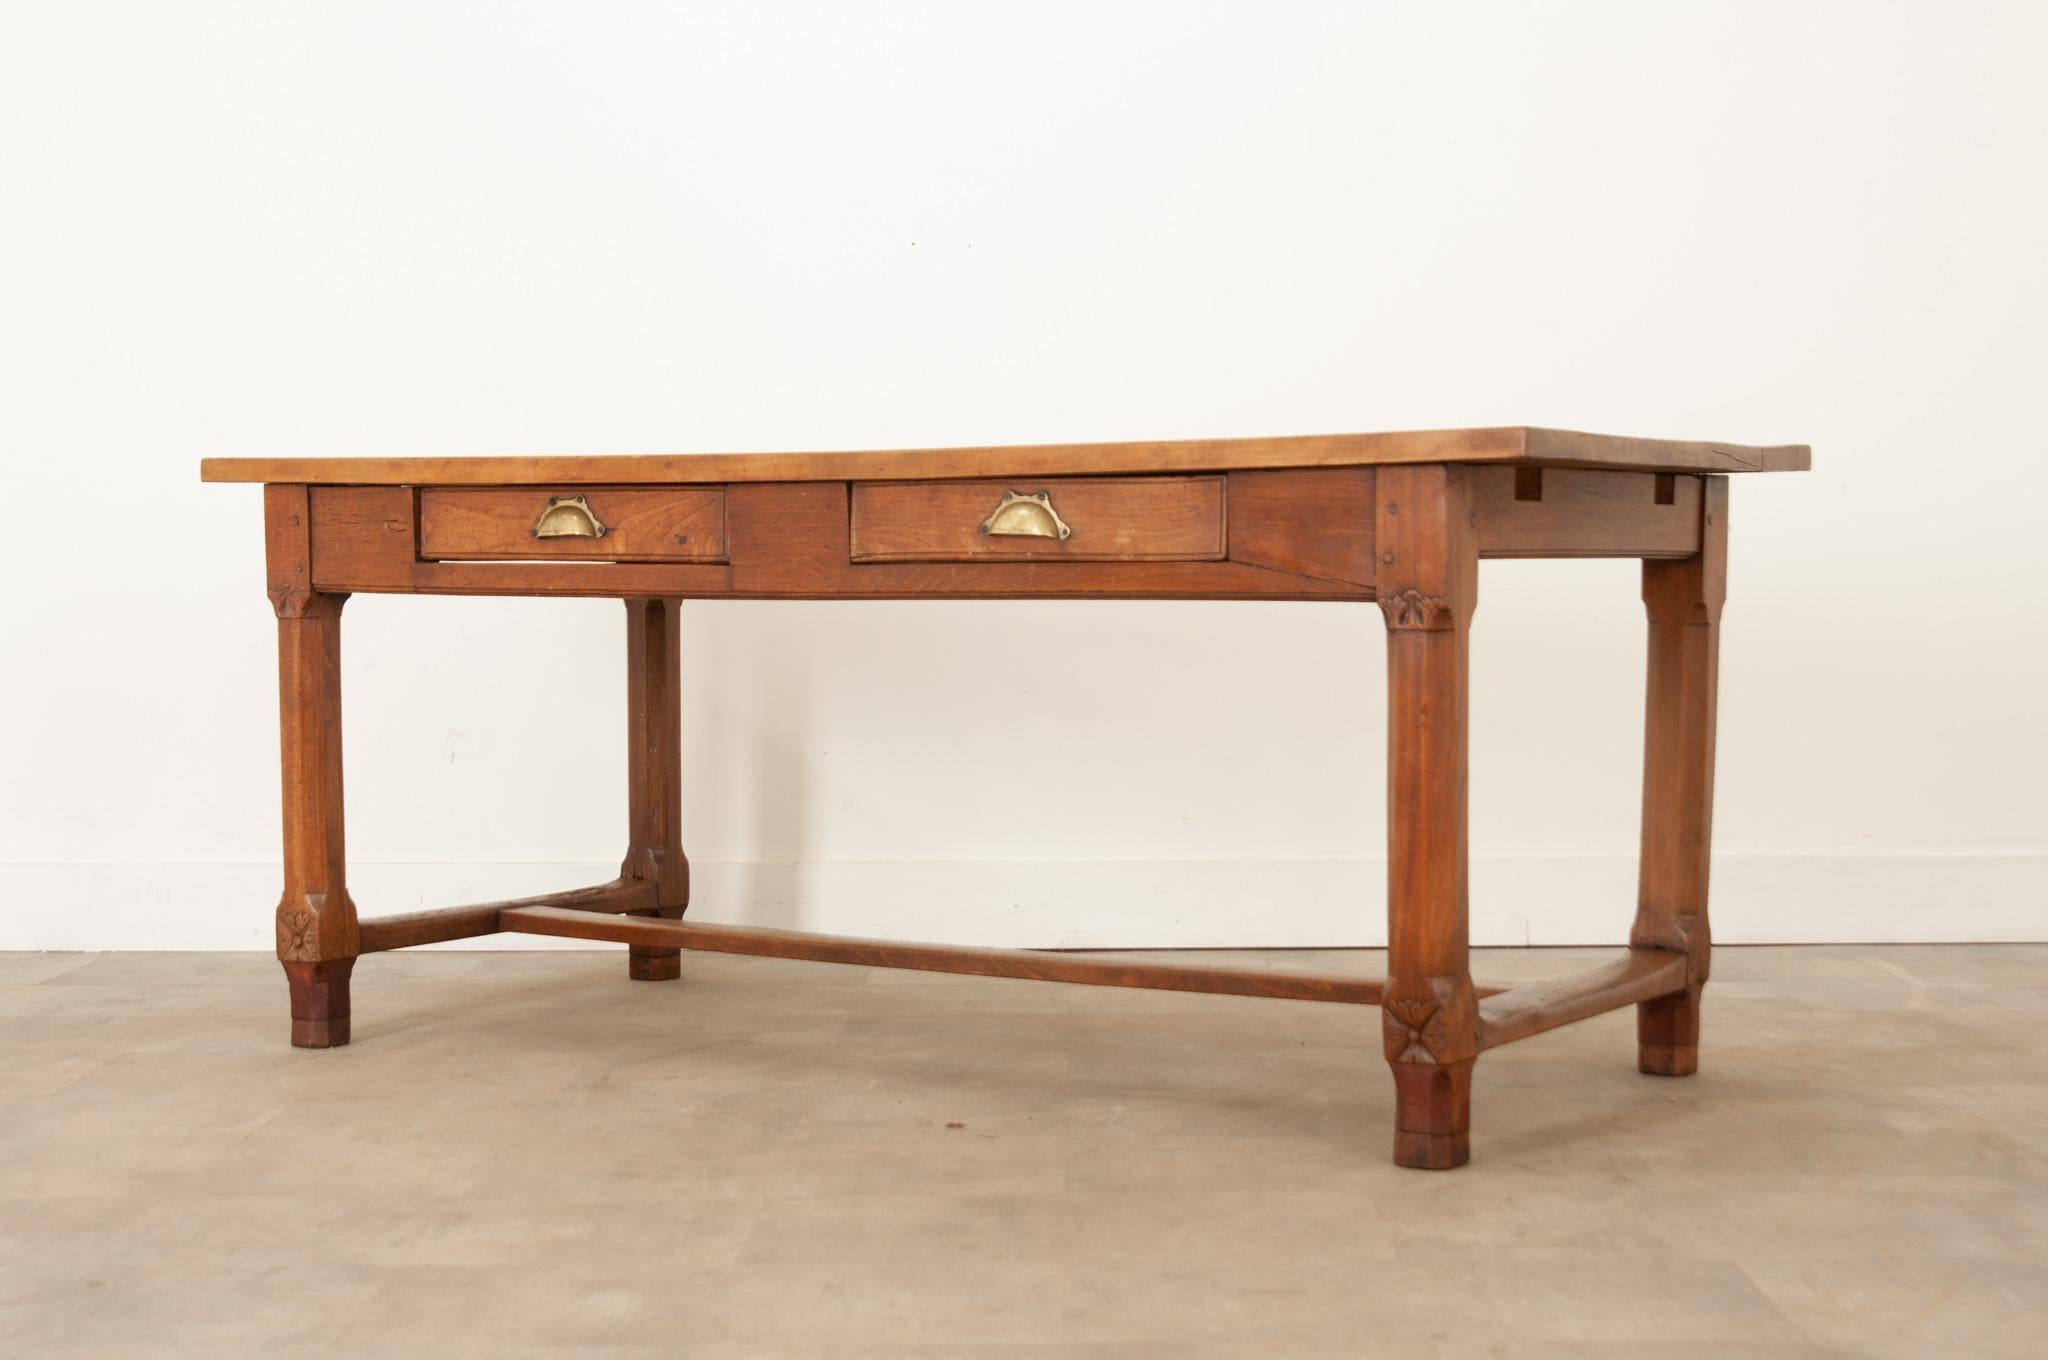 This solid oak farm table from France is full of rustic charm. Long planks of oak make up the smooth rectangular top and showcase a beautiful patina. The apron houses two drawers that open easily with brass crescent pulls. The interior of one drawer